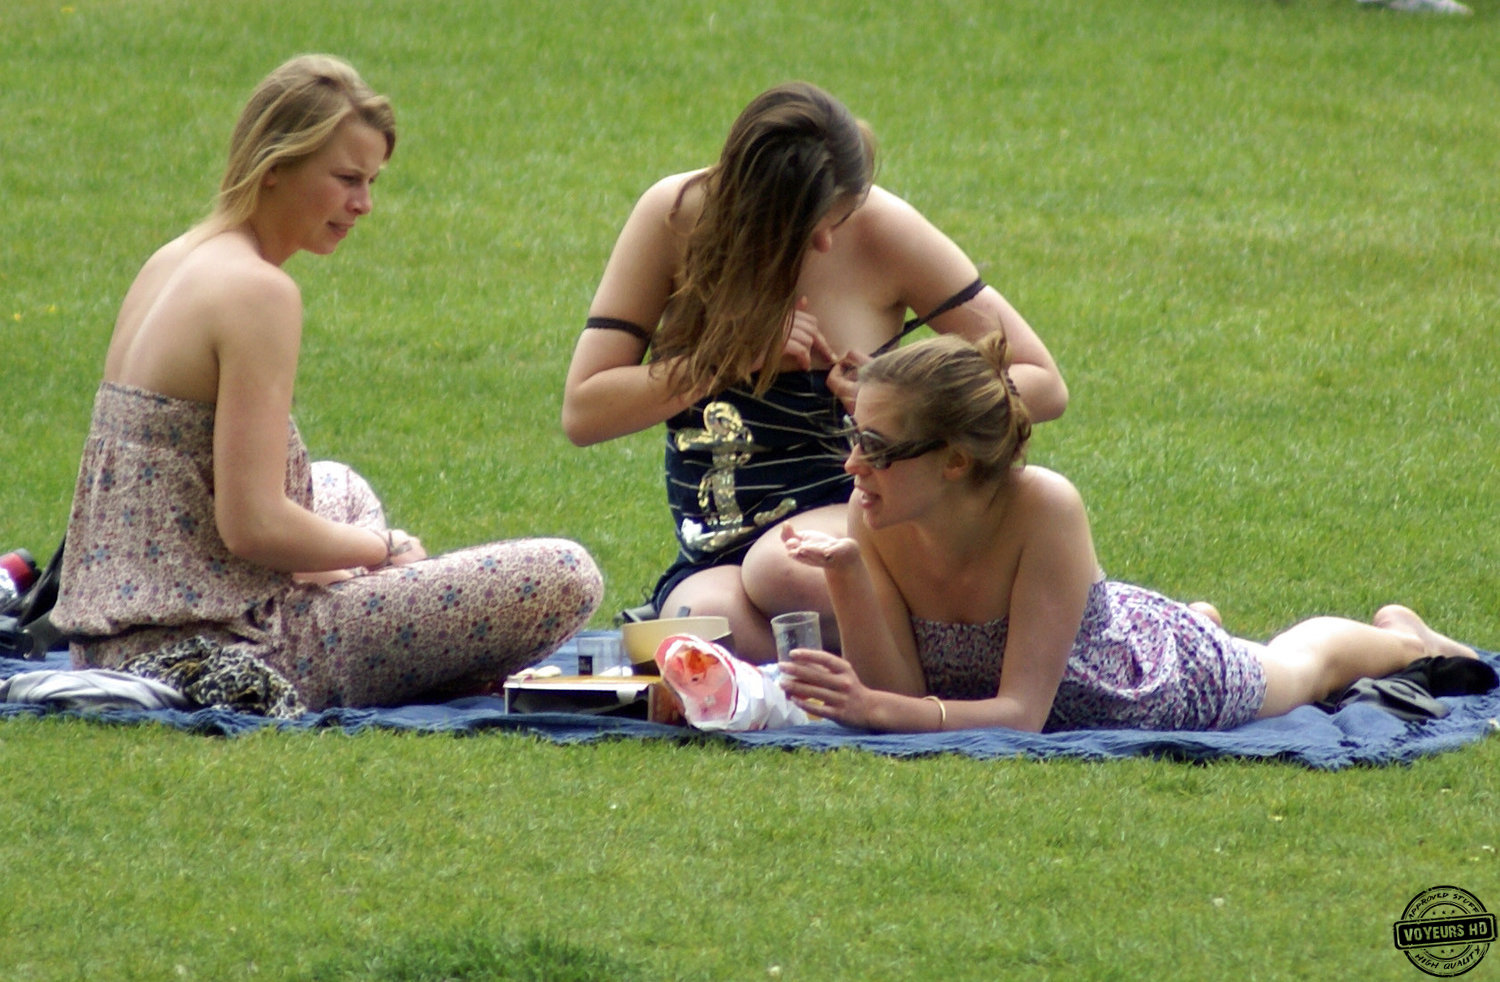 Lawn Party with Cleavage - Voyeur Videos